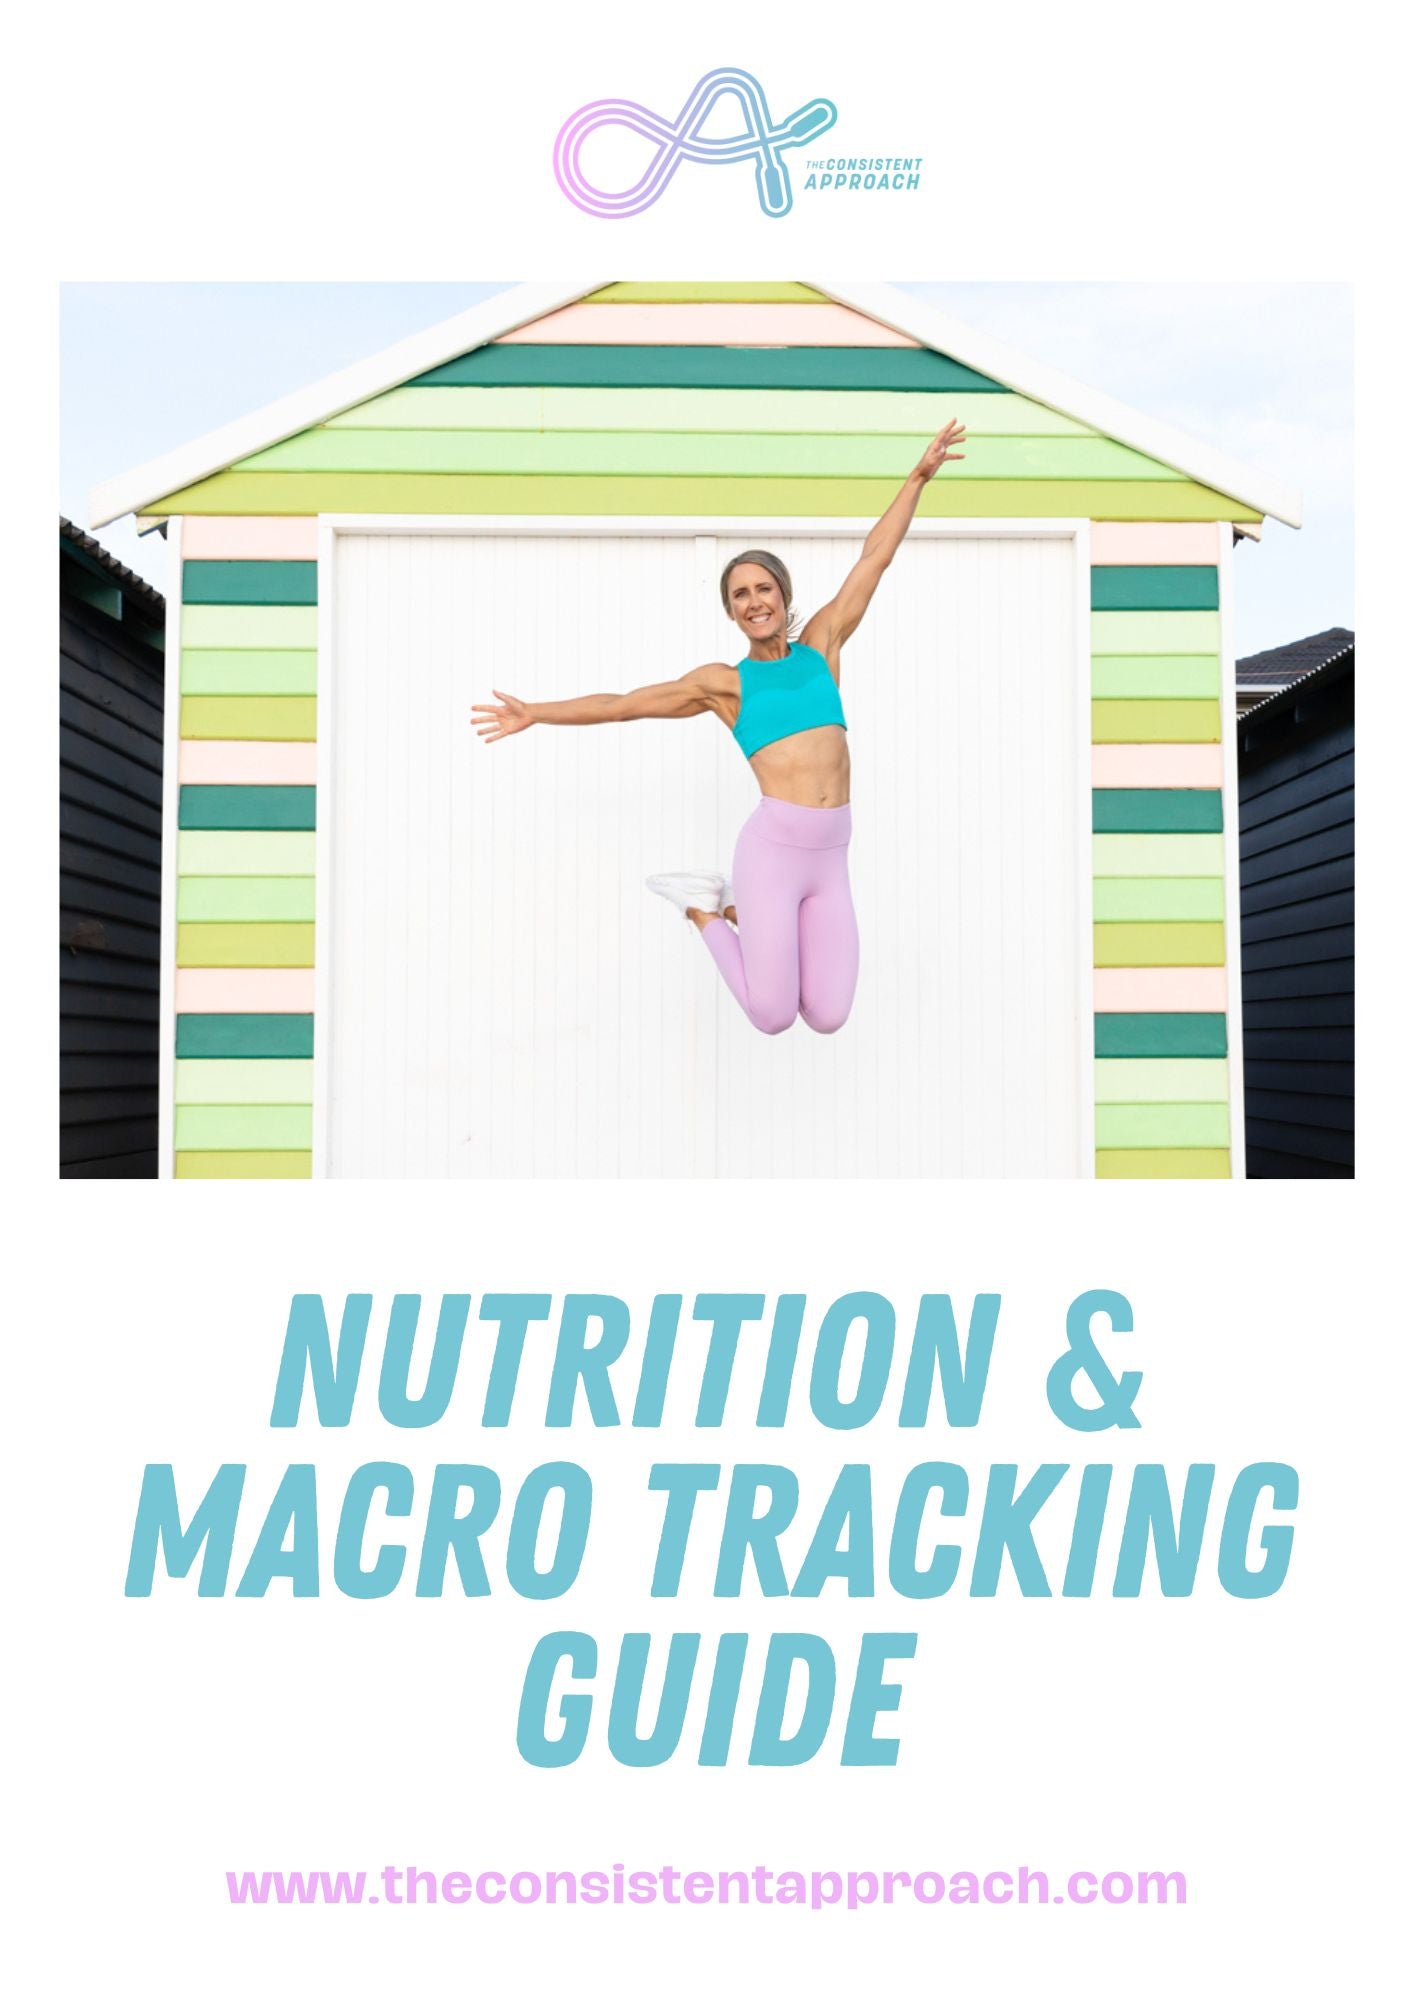 The Complete Nutrition & Macro Tracking Guide